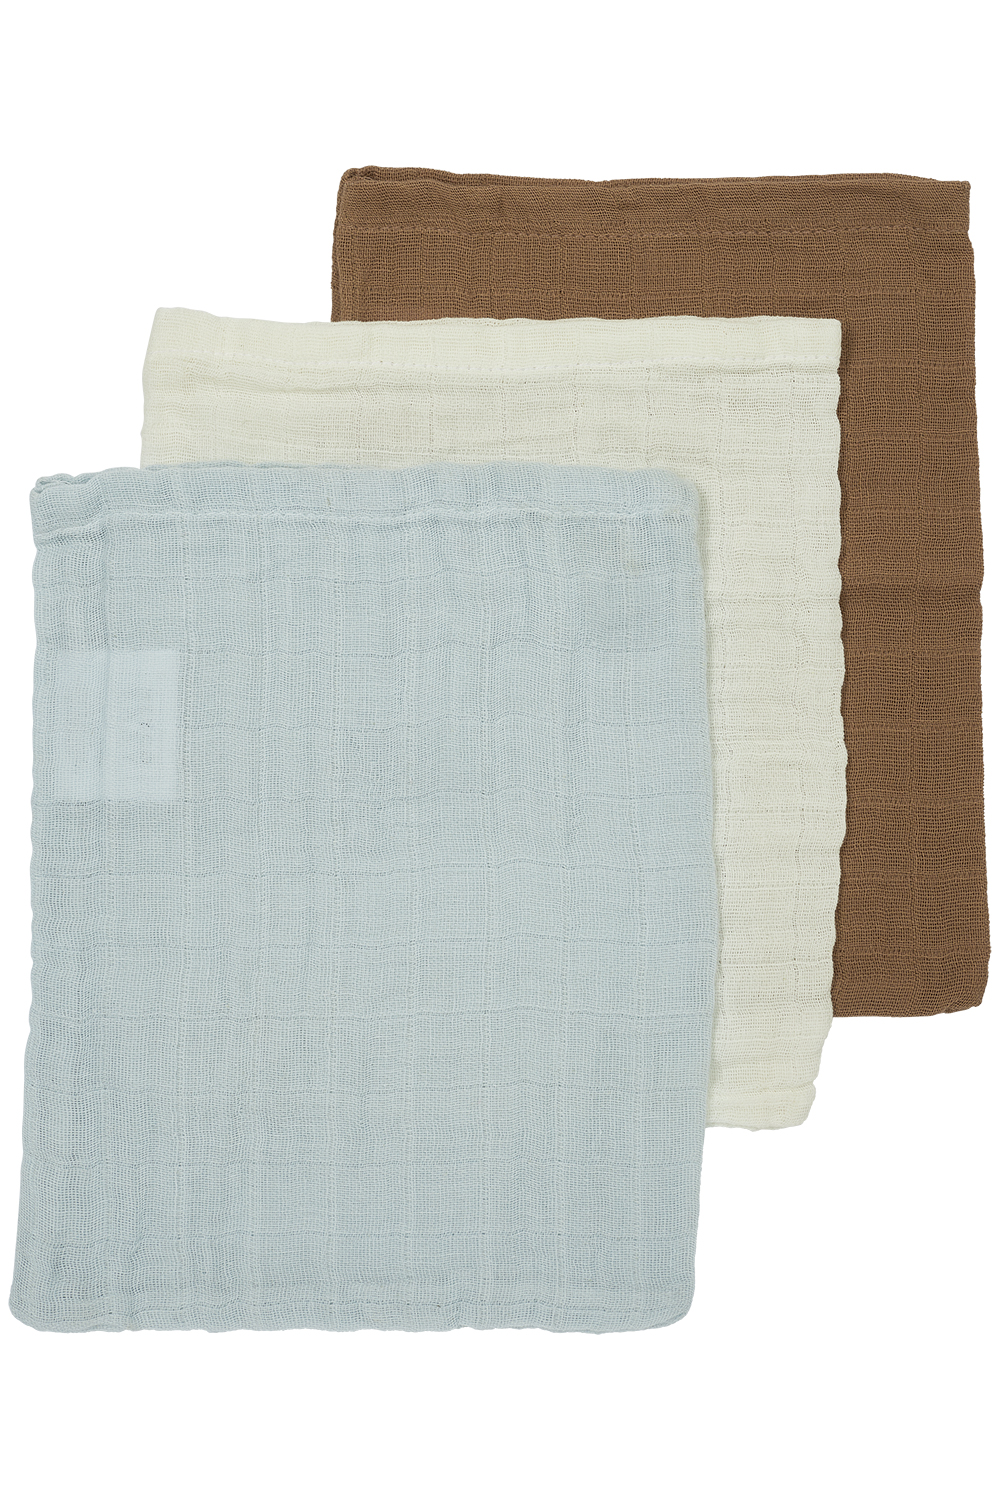 Waschhandschuhe 3er pack pre-washed musselin Uni - offwhite/light blue/toffee - 20x17cm